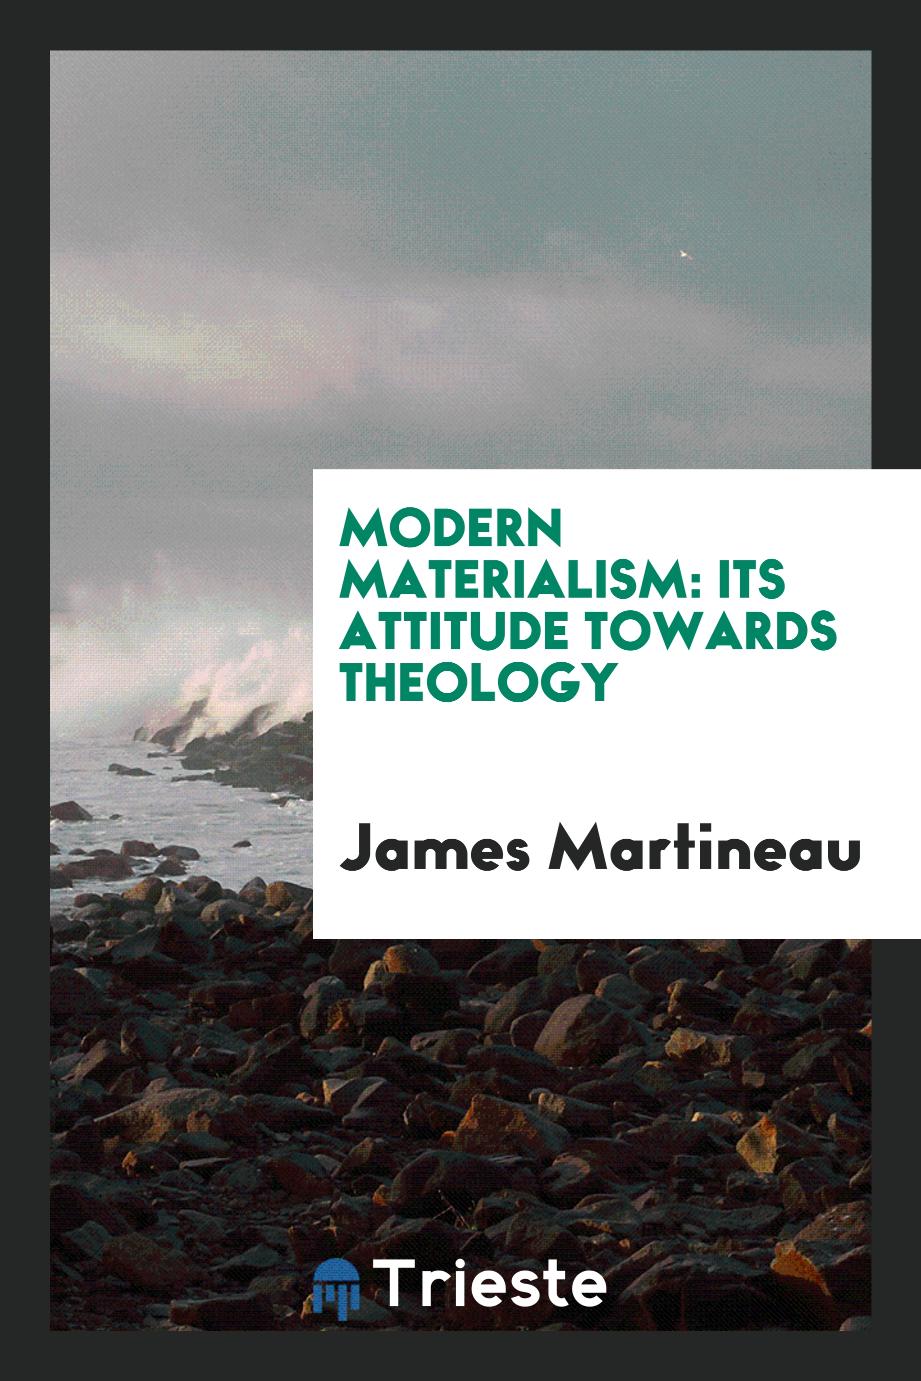 Modern Materialism: Its Attitude Towards Theology